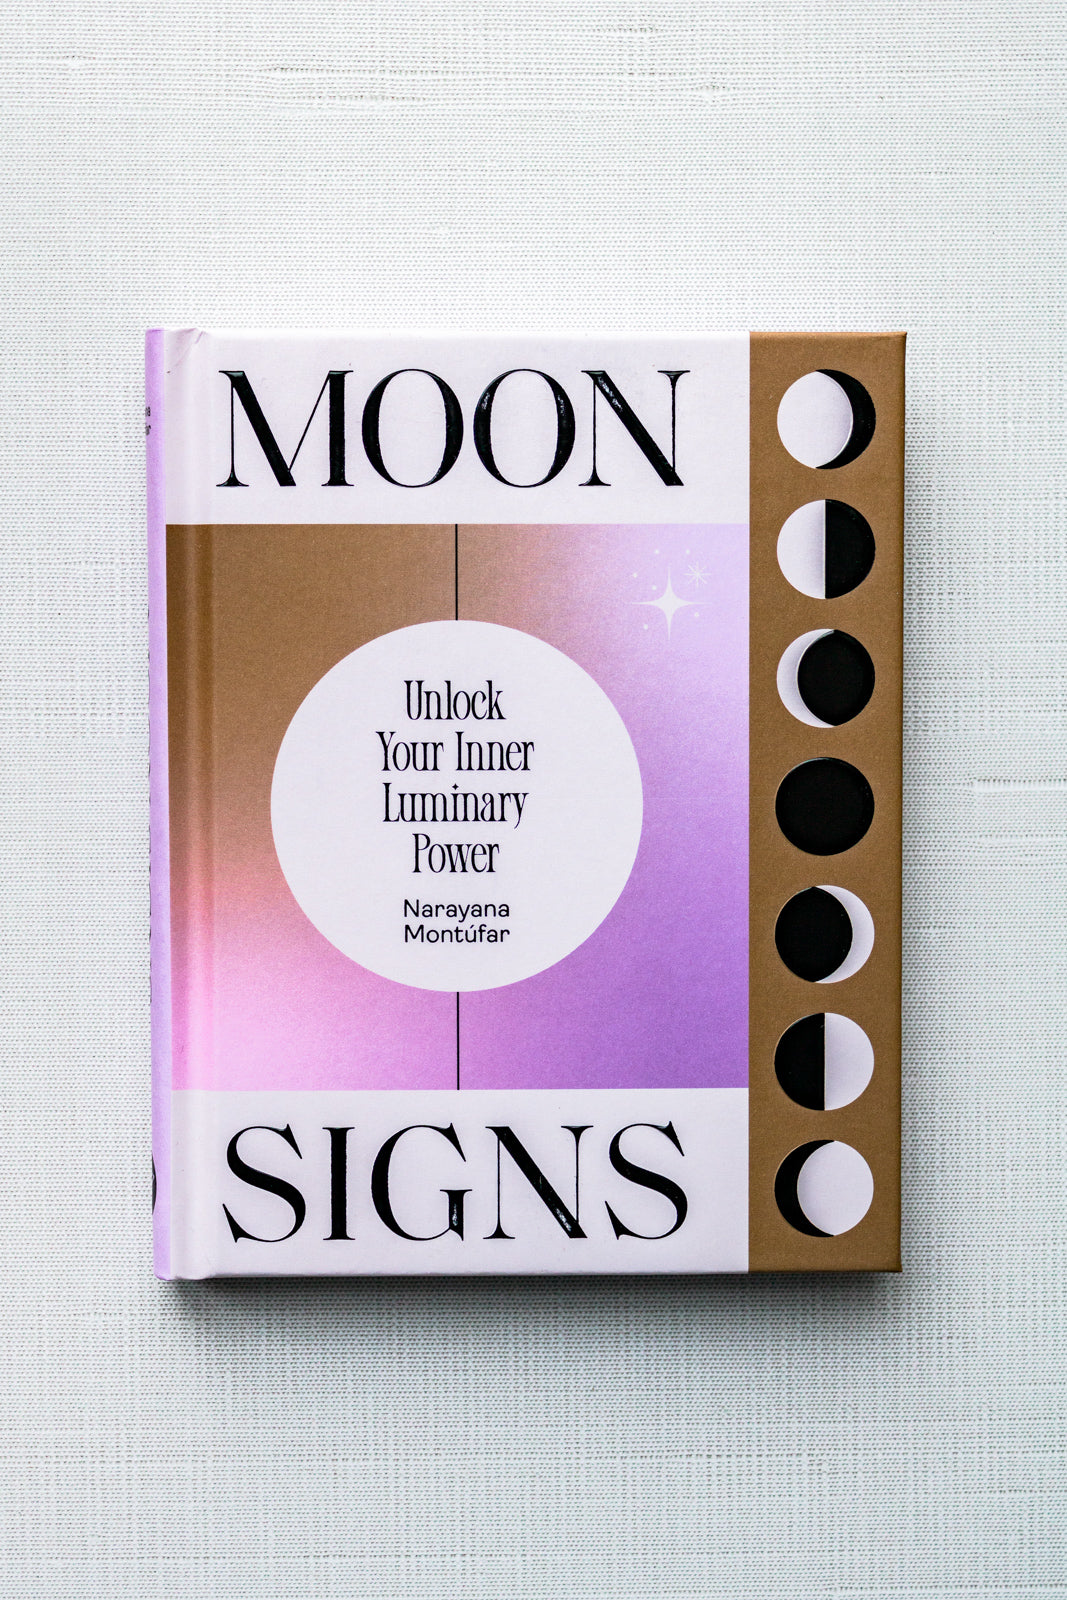 Moon Signs